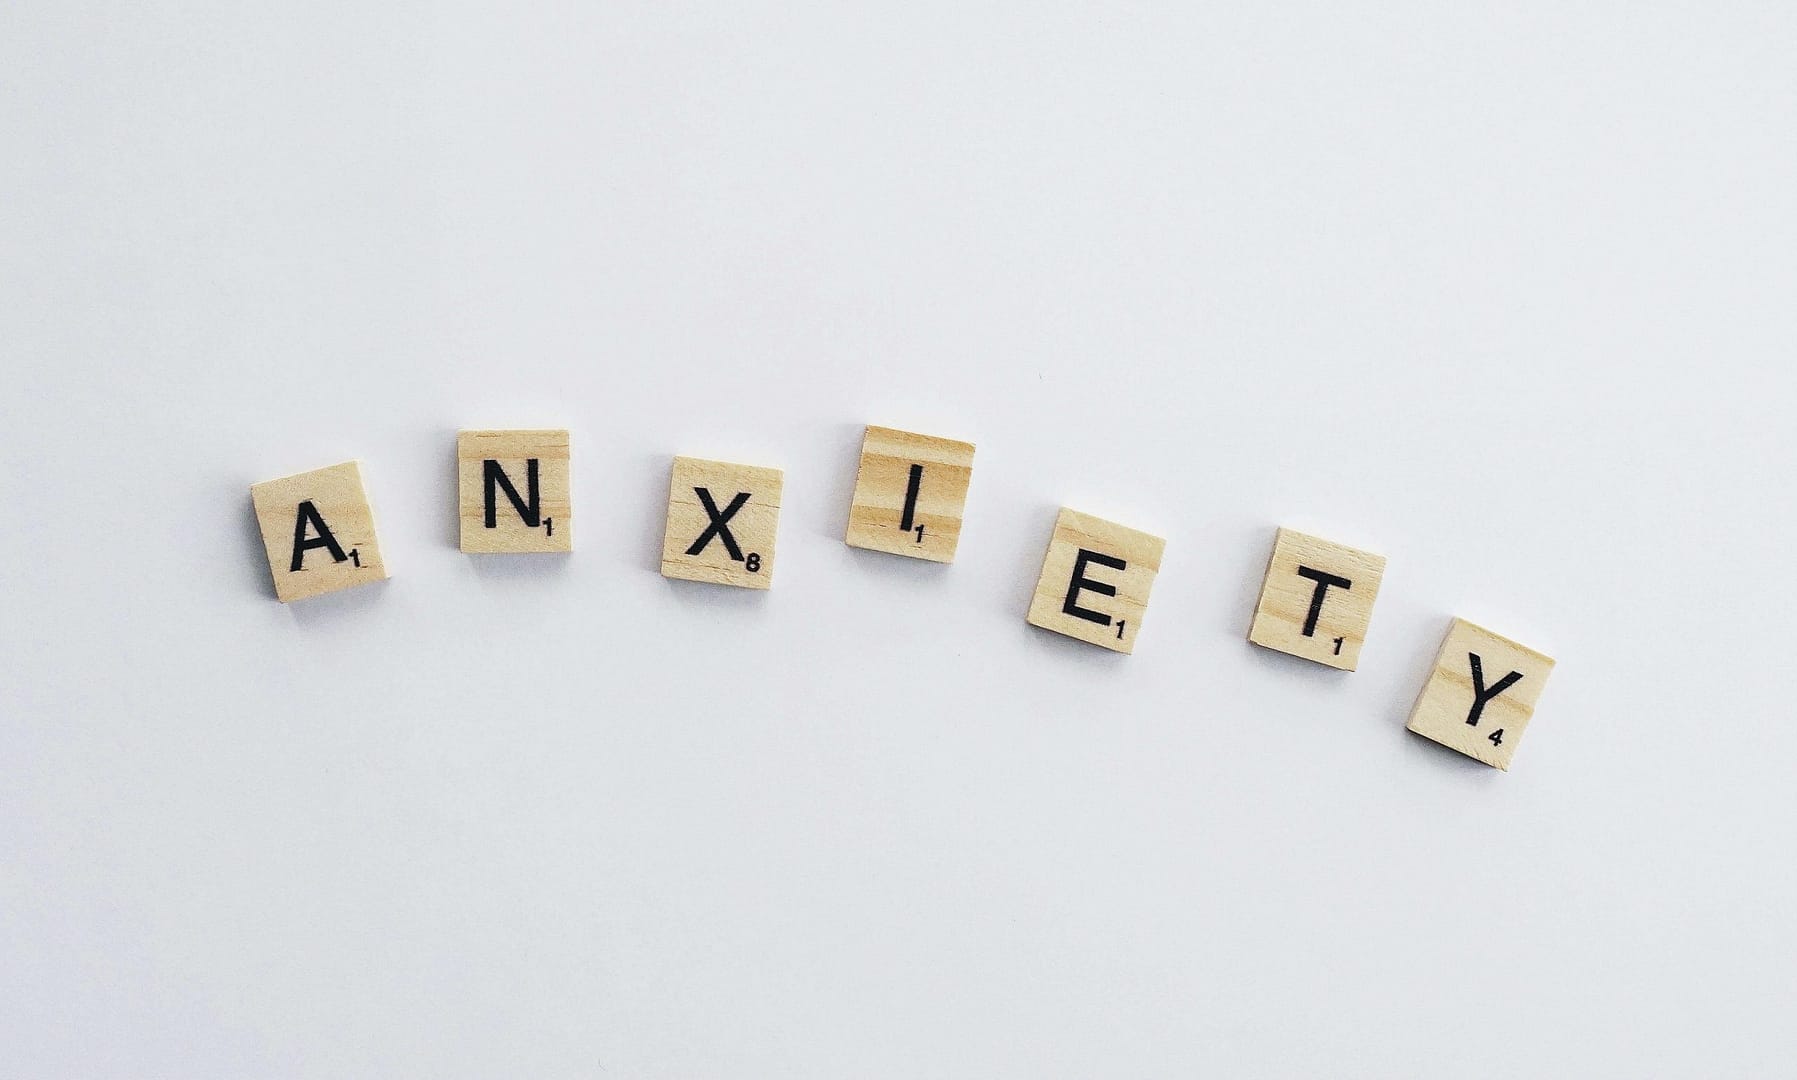 Anxiety is Mistaken for Something Else